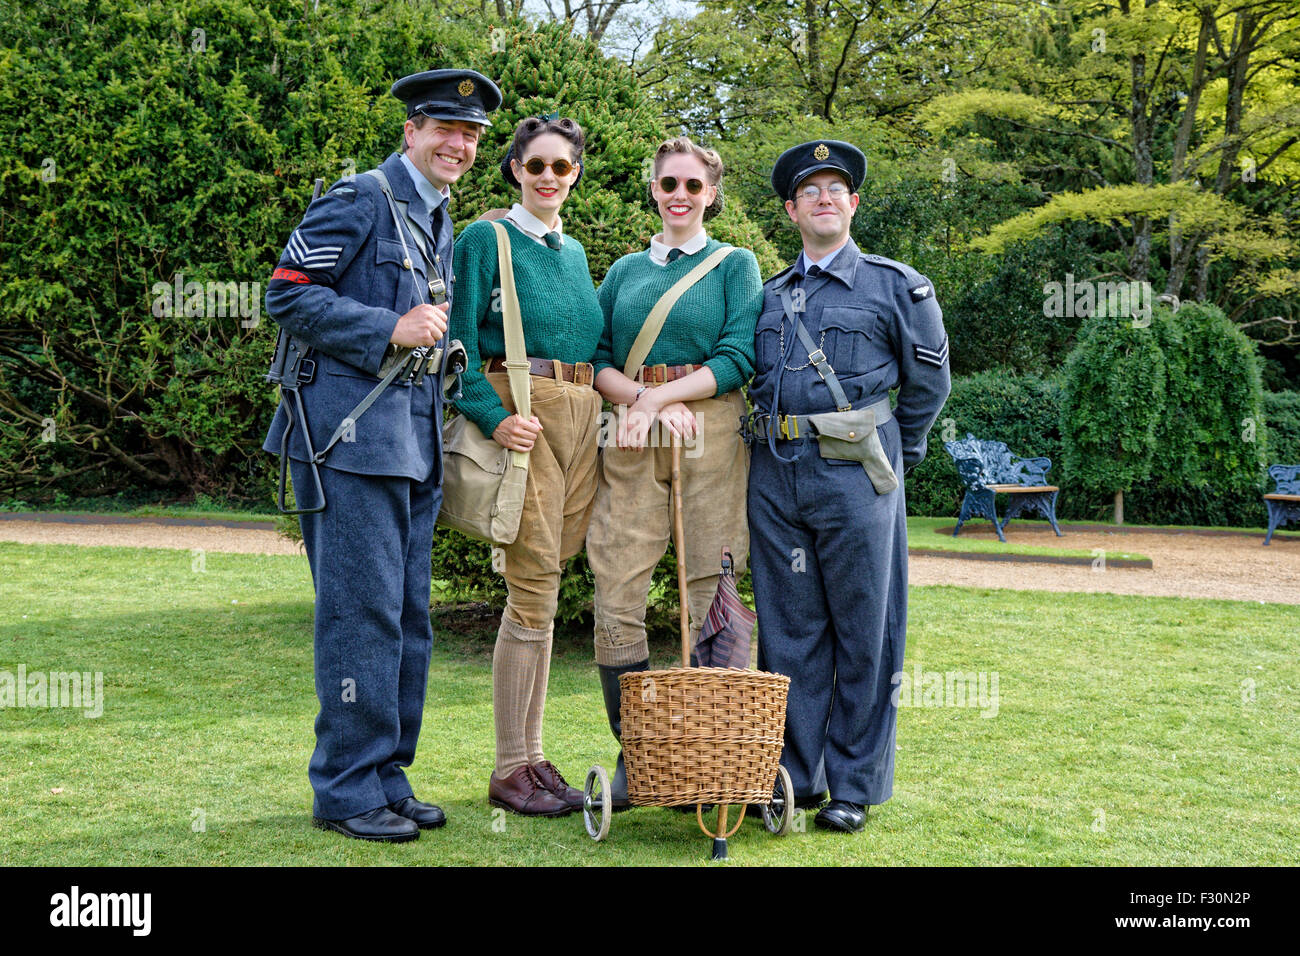 Living historians as uniformed RAF Police from the 1940s era together with members of the Womens Land Army in authentic dress Stock Photo